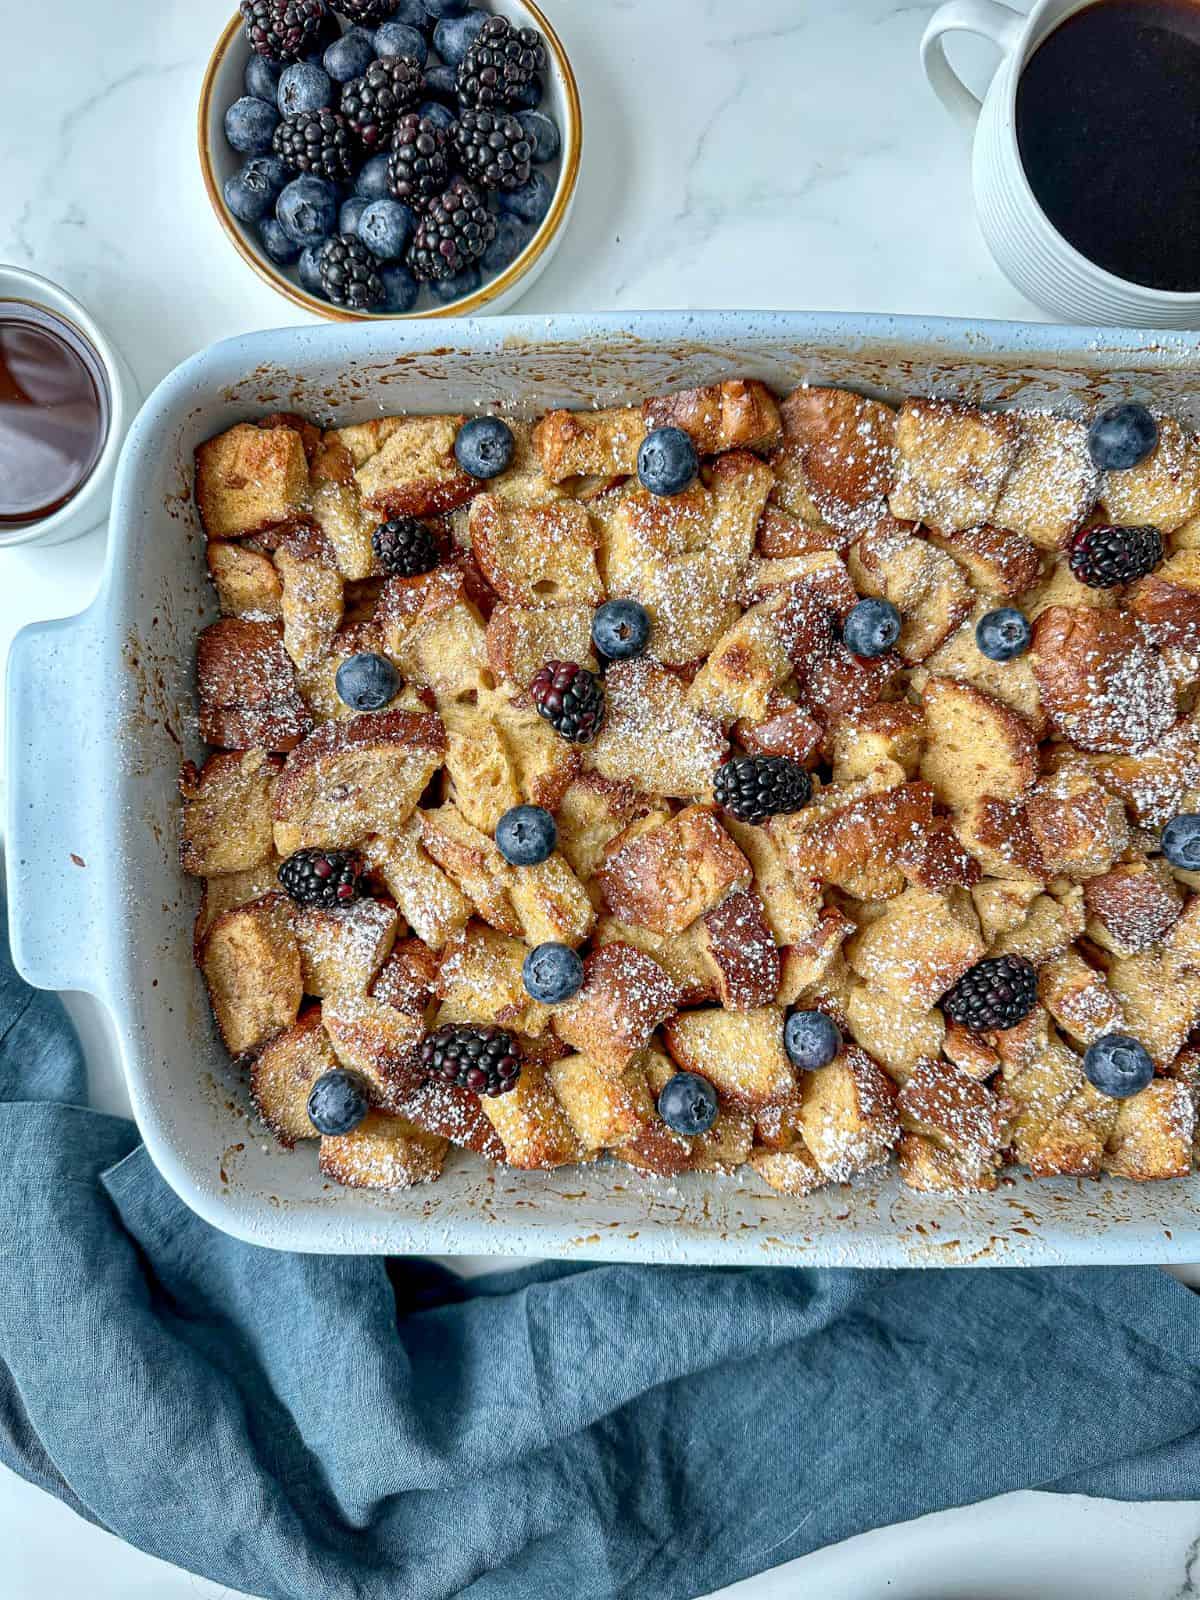 Brioche French toast casserole in a baking dish topped with fresh berries.